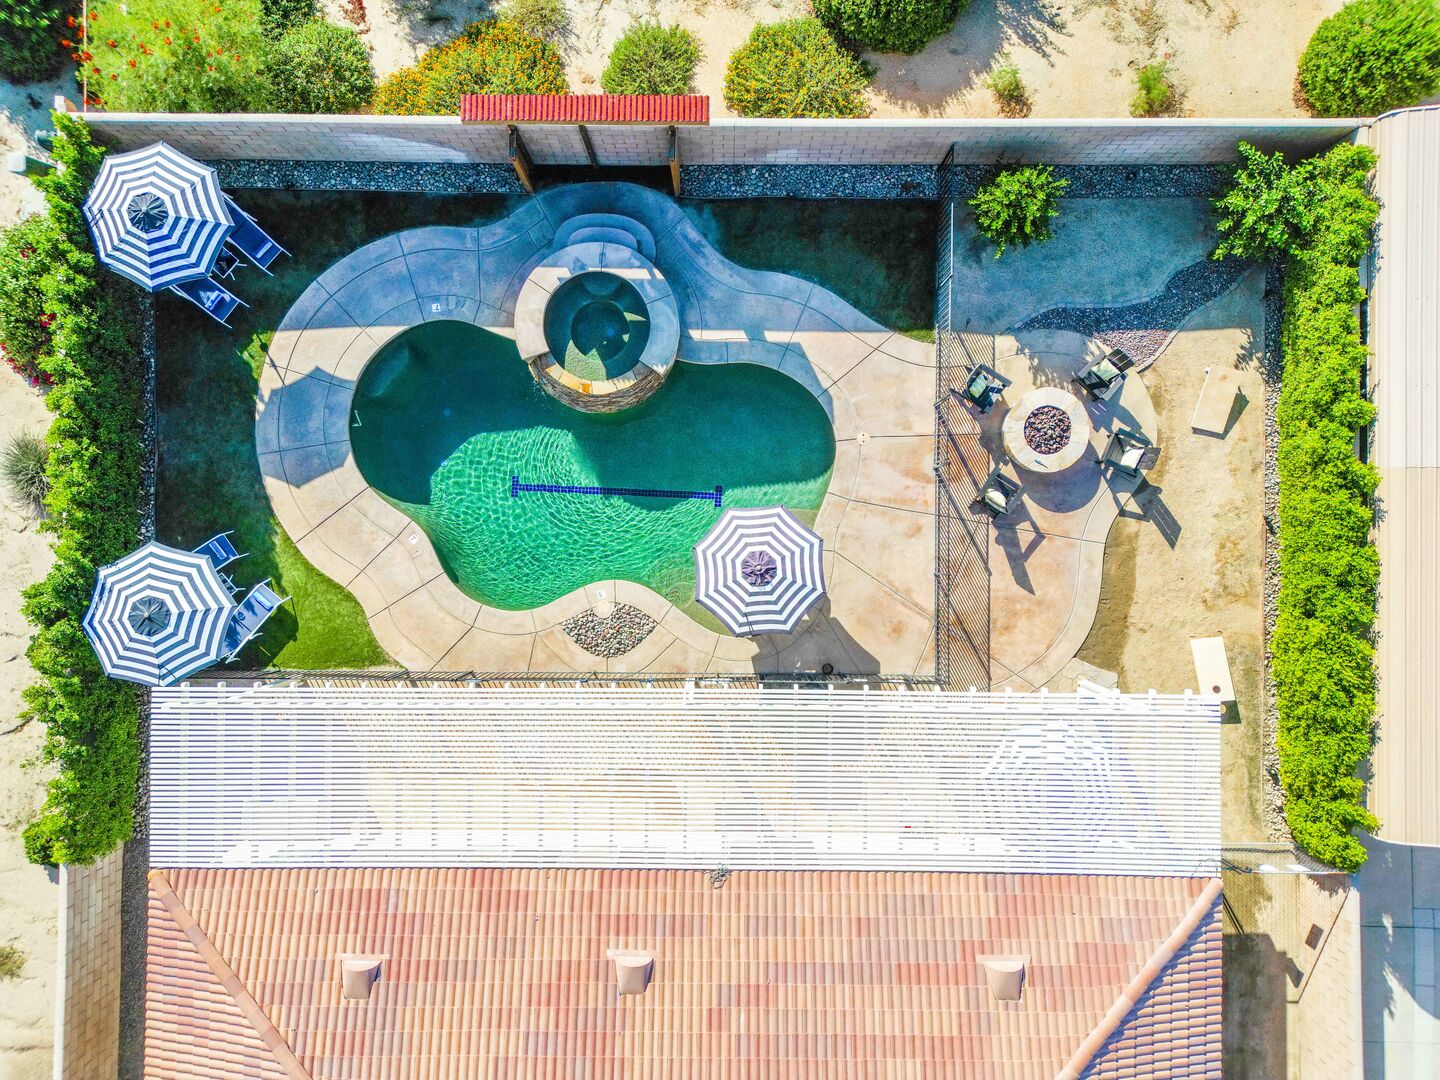 This backyard has it all: pool, warm spa, loungers, shade-providing umbrellas, fire pit, classic game f corn hole, and it's even equipped with a built-in gate, ensuring the safety of your little ones and pets!